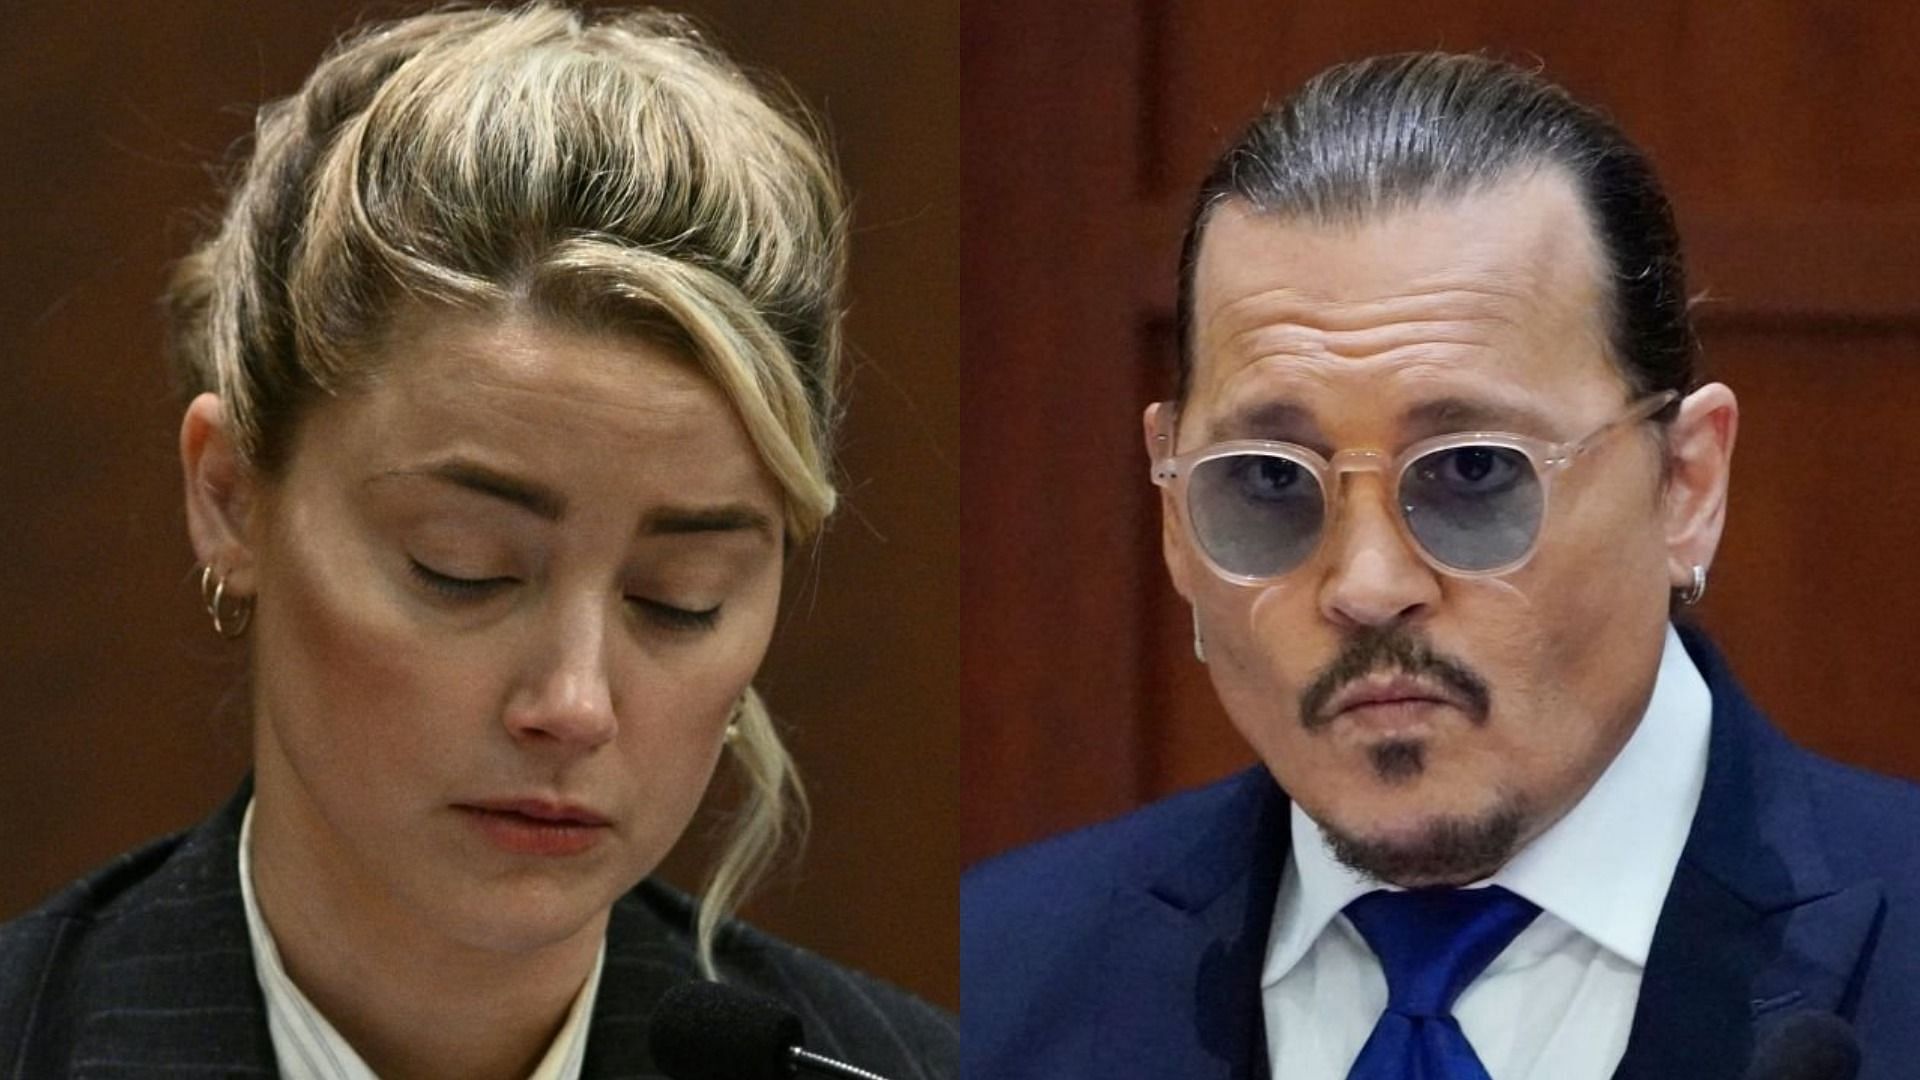 The Johnny Depp vs. Amber Heard is currently undergoing jury deliberations and awaiting a verdict (Image via Getty Images)